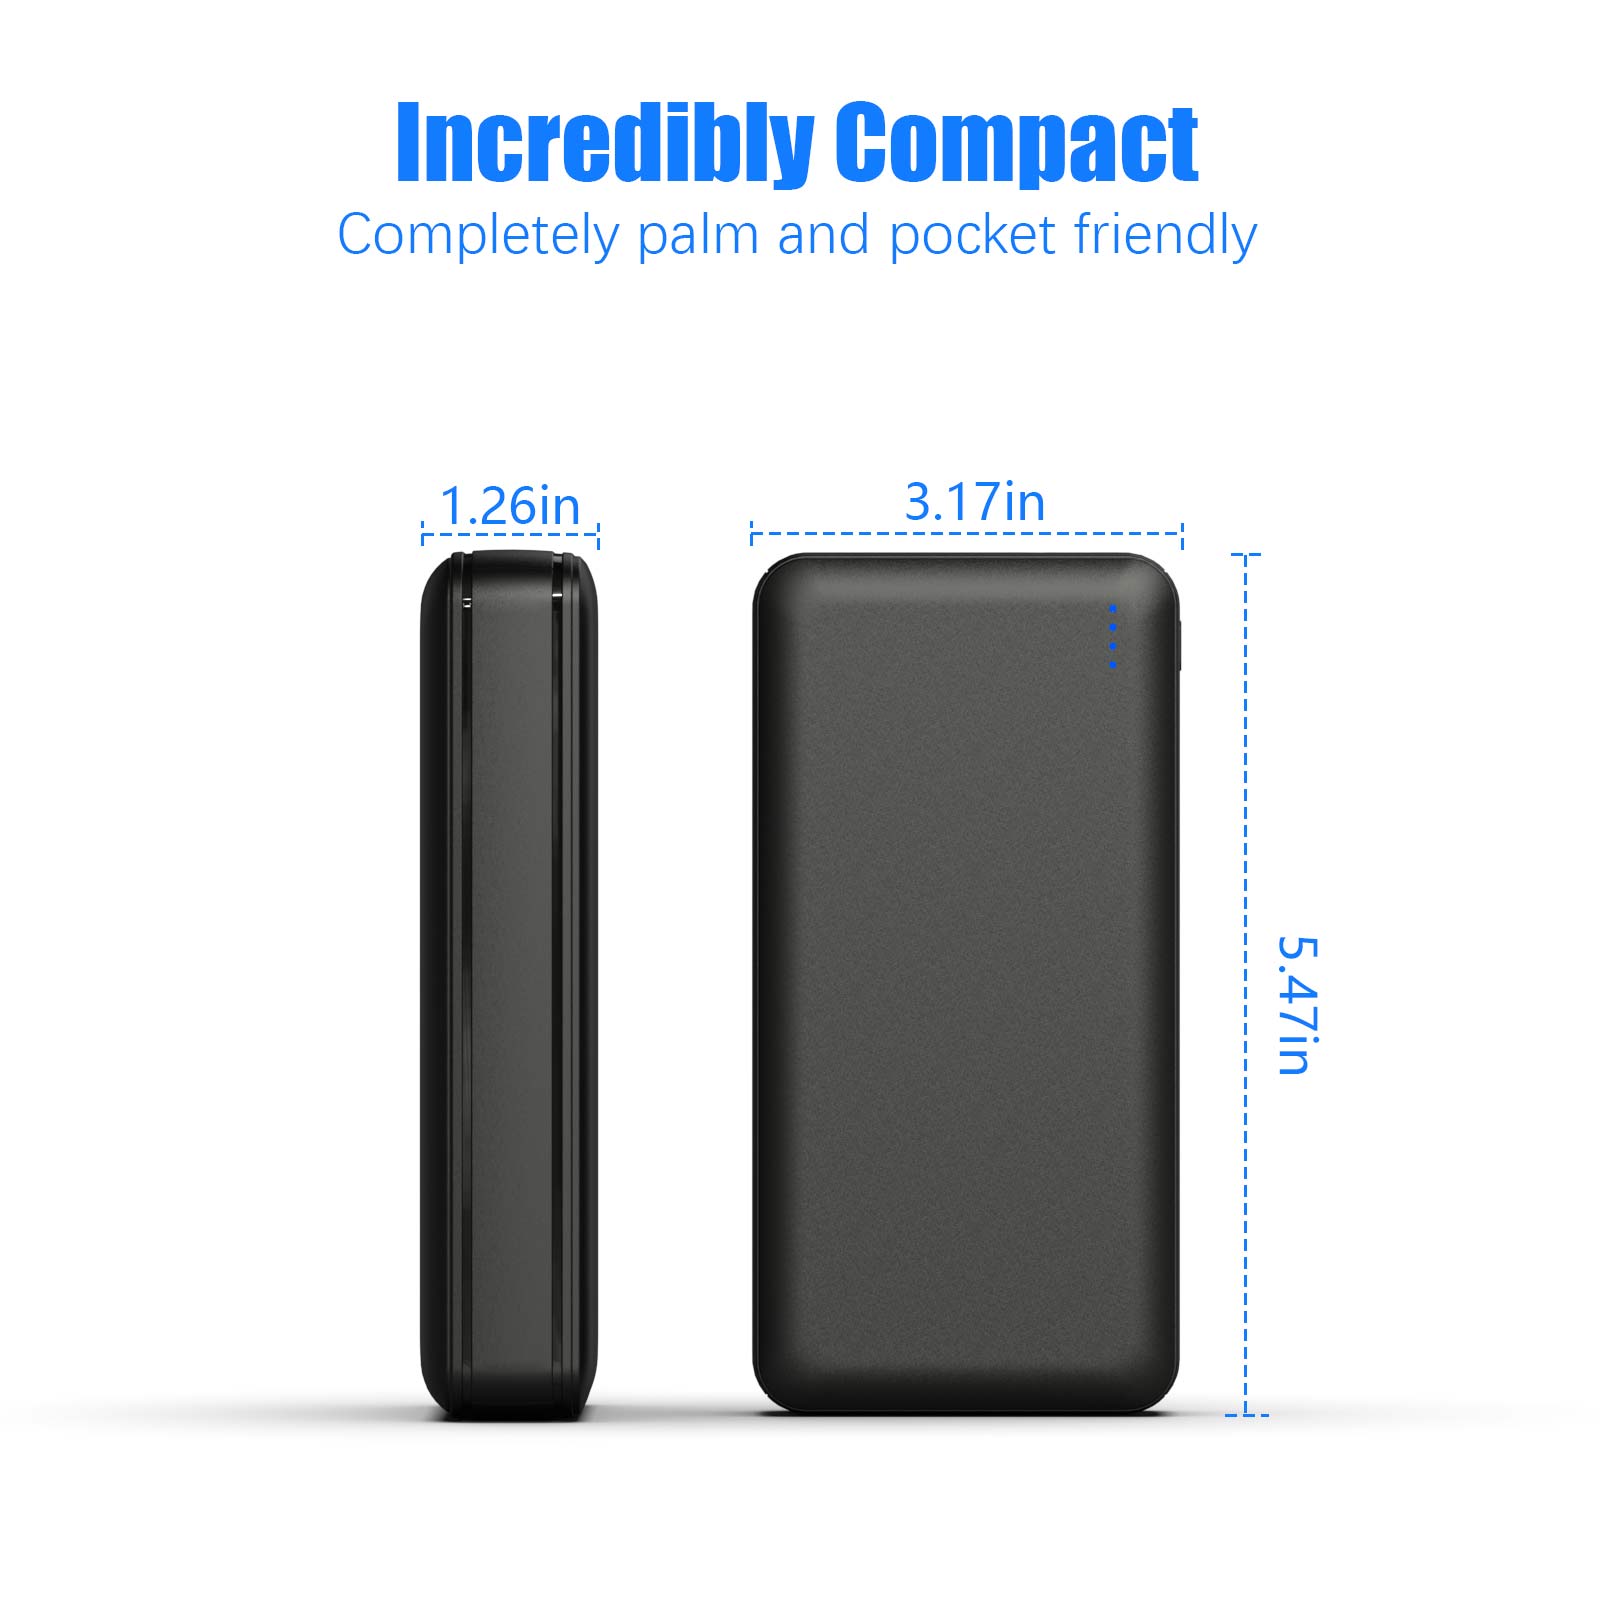 Power Bank, 26800mAh Phone Portable Charger, External Battery Pack, Fast charging for Smartphones Cameras Tablets etc.